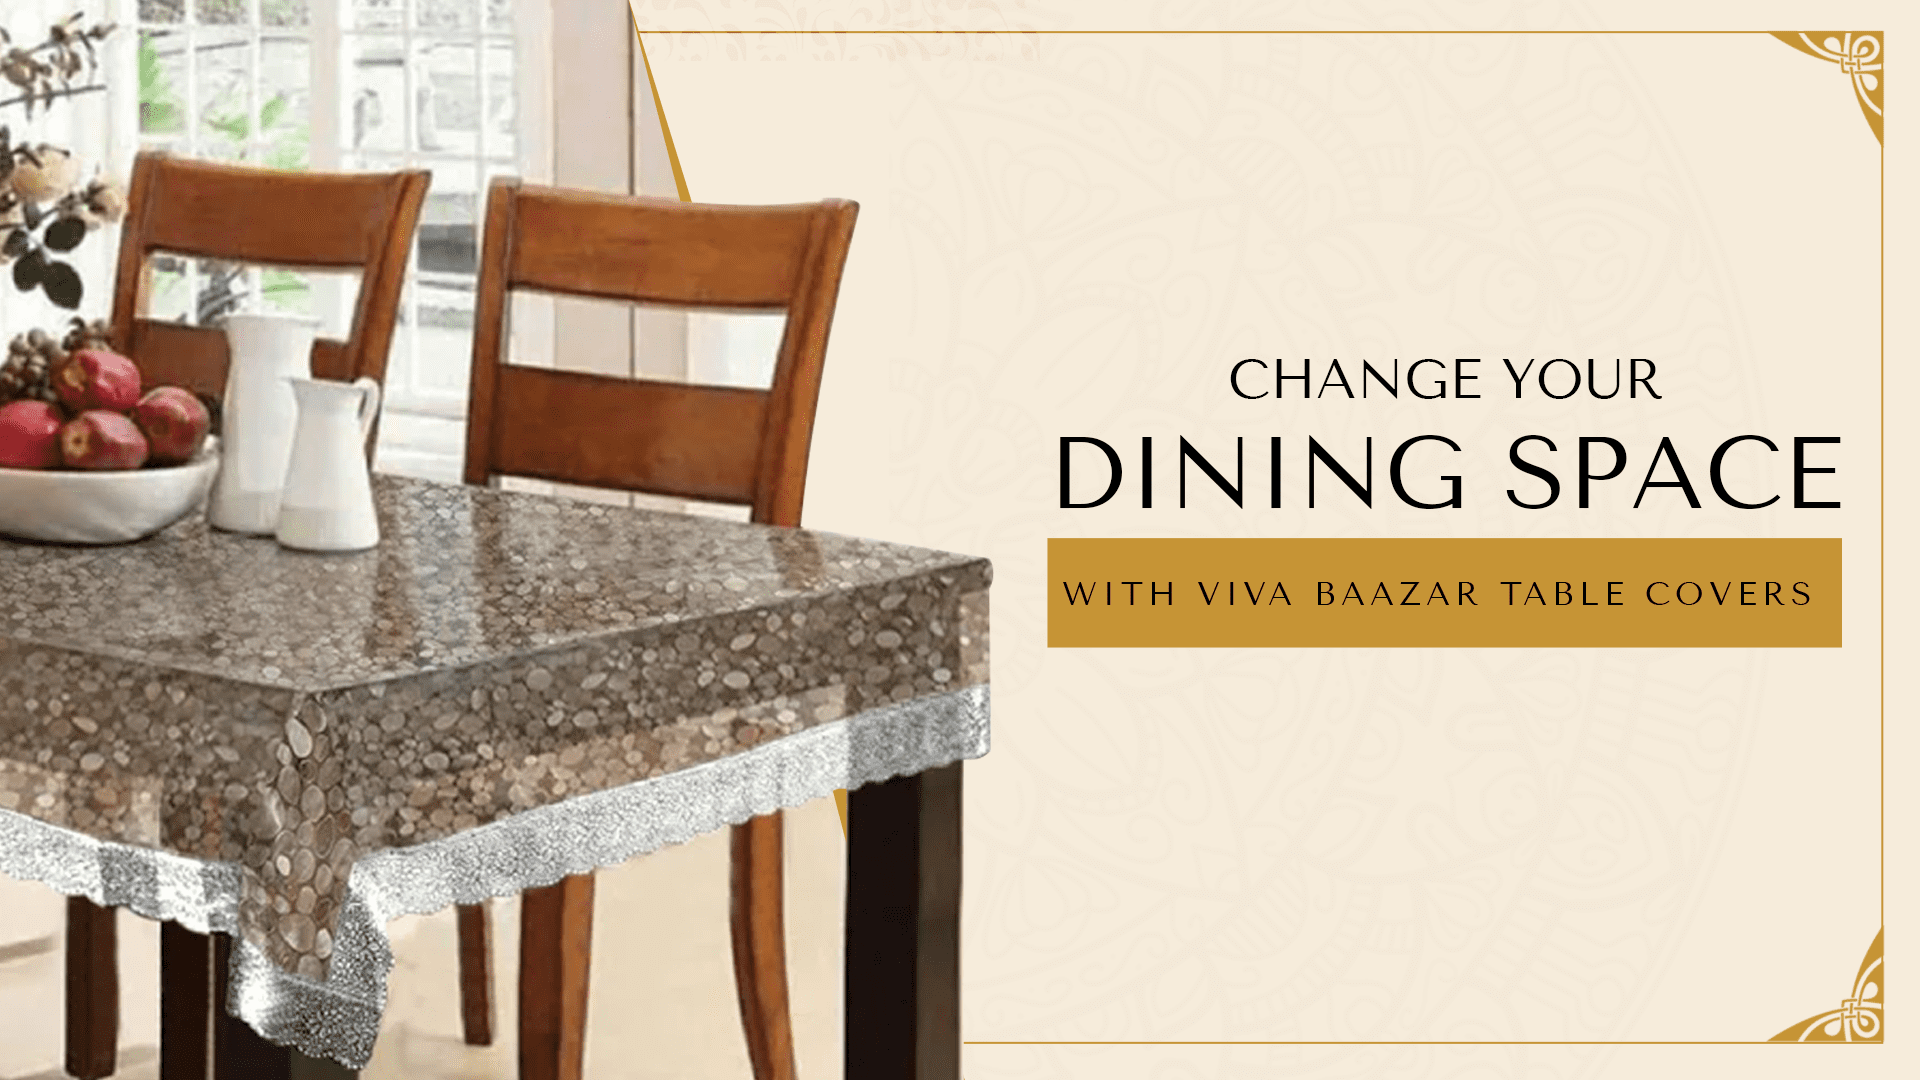 Change Your Dining Space With Viva Baazar Table Covers